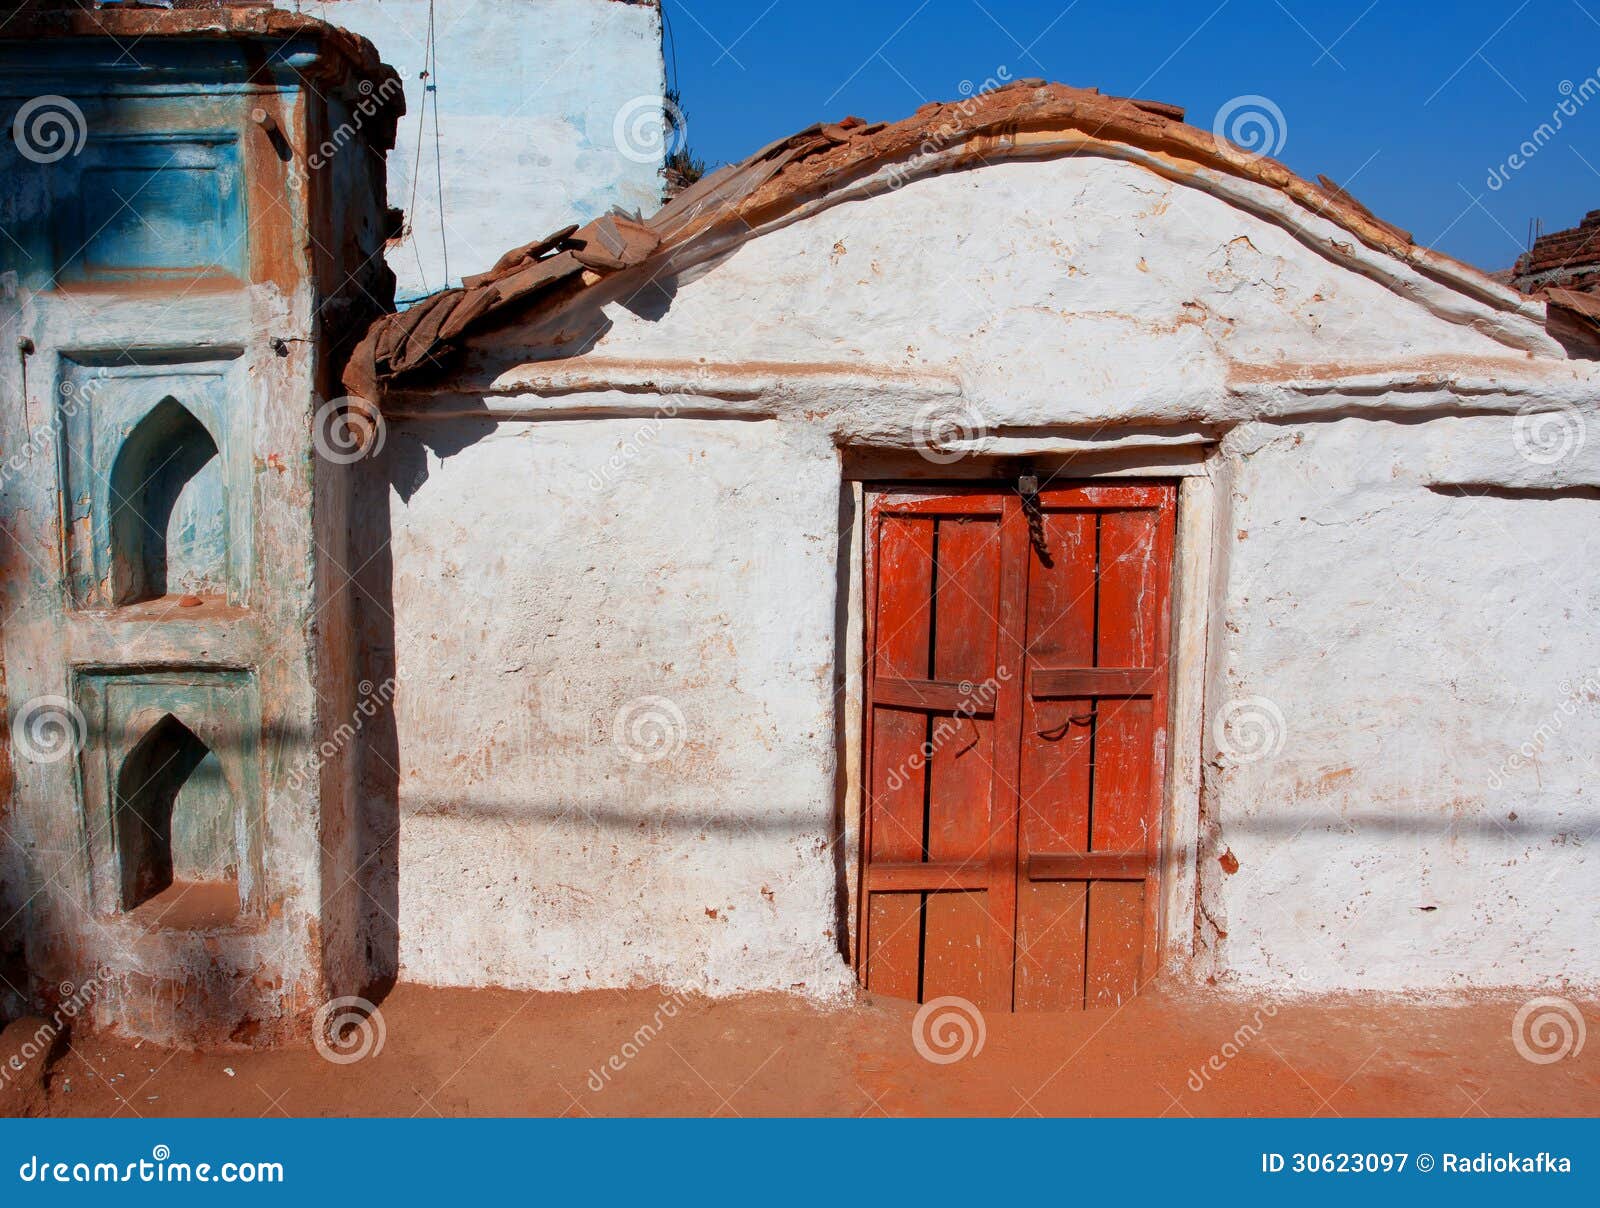  Traditional Indian Village House Stock Image Image of 